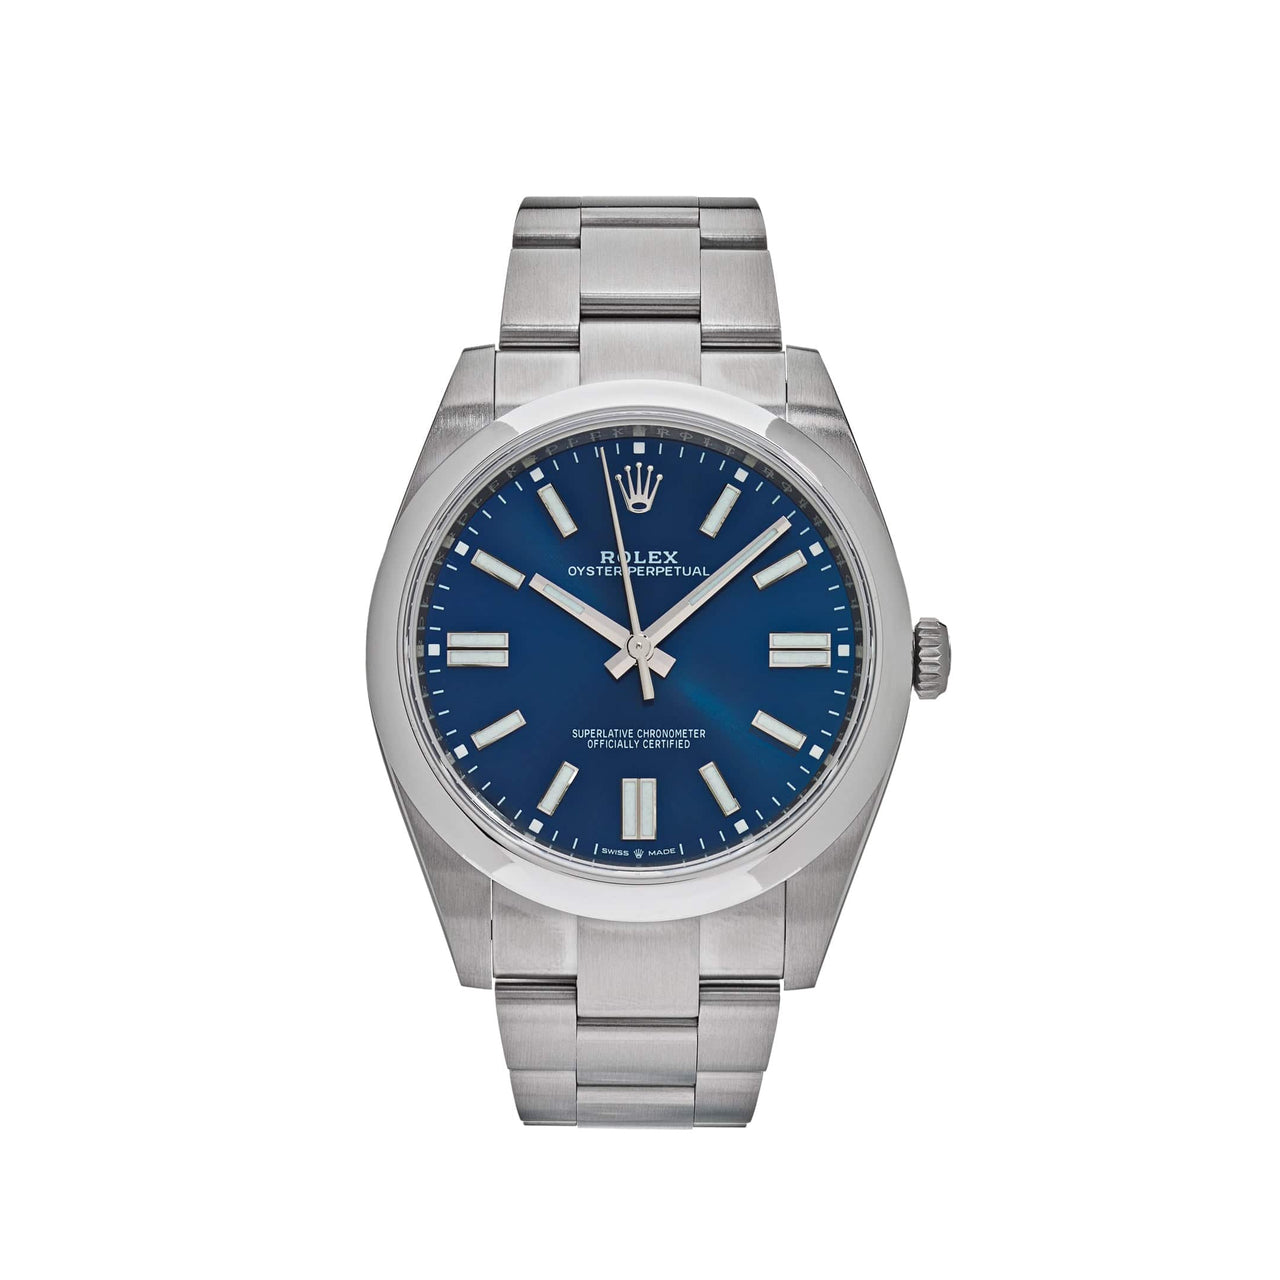 Luxury Watch Rolex Oyster Perpetual 41 Stainless Steel Blue Dial 124300 Wrist Aficionado